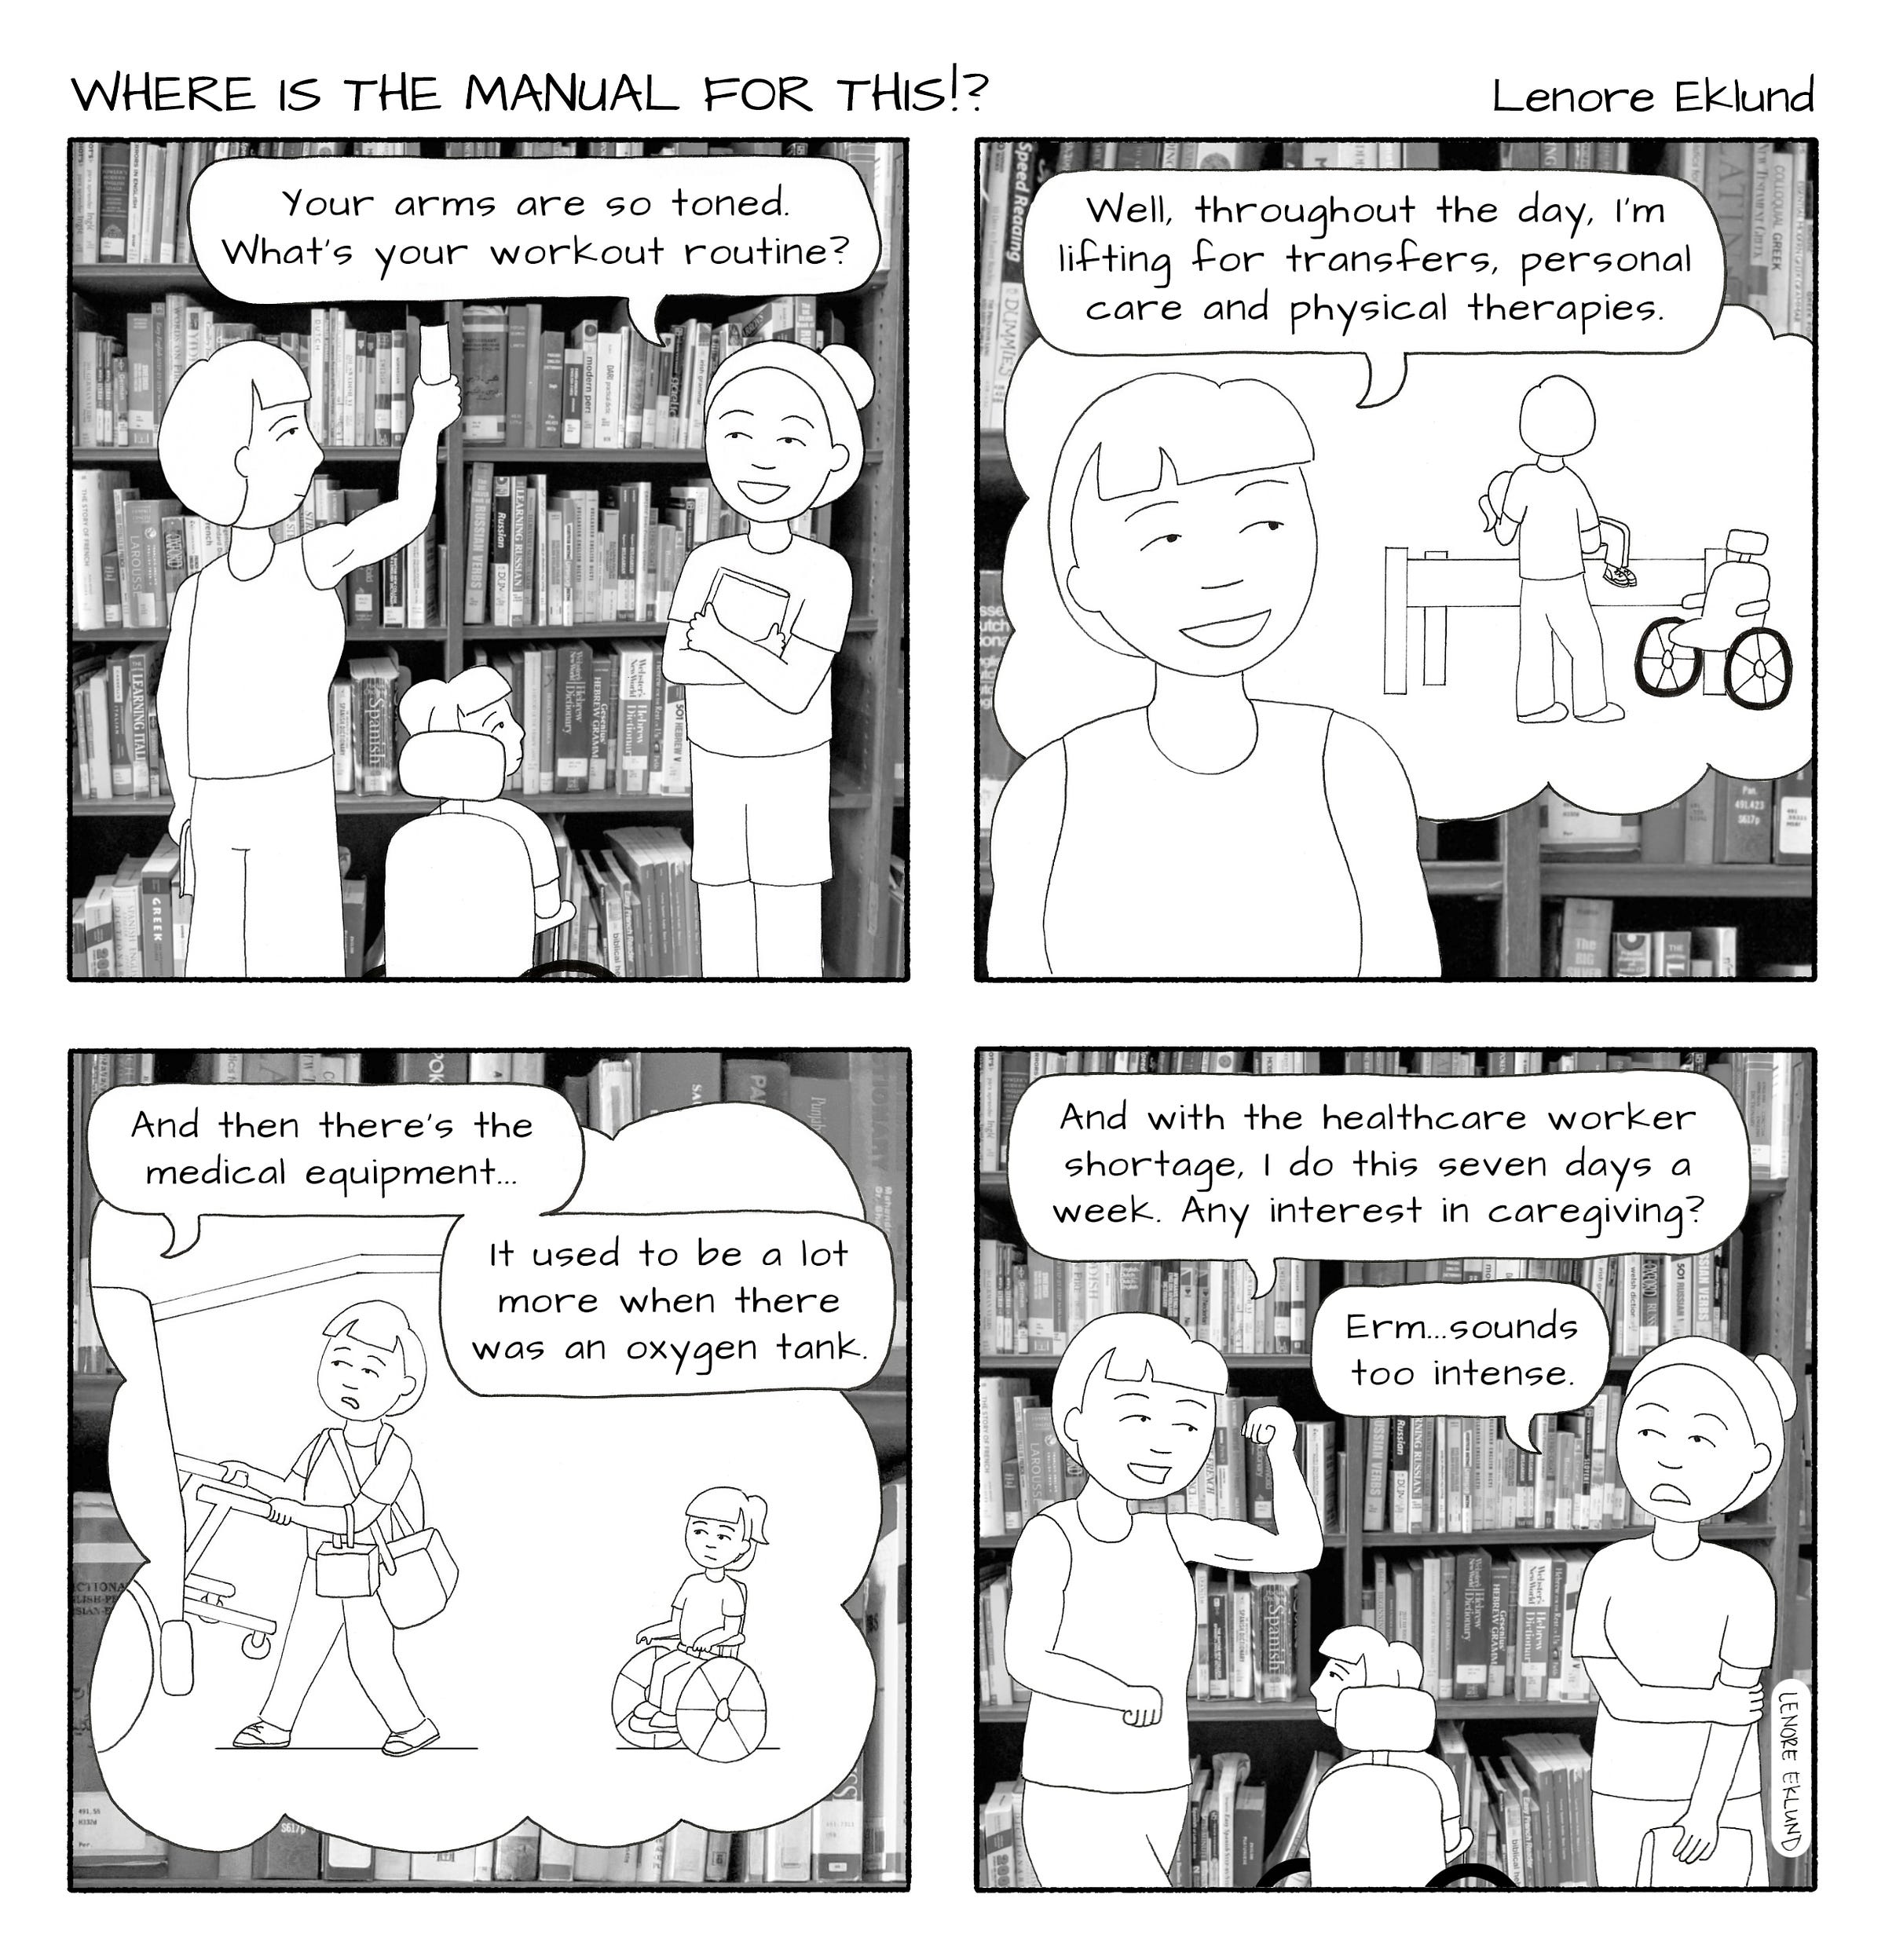 A four-panel line drawing cartoon titled Where is the Manual for This?!. The first panel shows a mom reaching for a book on a high library bookshelf. She and her daughter, who is in a wheelchair, look as another woman says “Your arms are so toned. What’s your workout routine?” In the second panel, the mom’s thought bubble shows her lifting her daughter from the wheelchair to a bed. She says “Well, throughout the day, I’m lifting for transfers, personal care and physical therapies.” In the next panel, her thought bubble is an image of her loading a walker in the back of a car as her daughter watches from her wheelchair. “And then there’s the medical equipment,” she says. “It used to be a lot more when there was an oxygen tank.” In the final panel, the mom strikes a pose with her bicep muscle. “And with the healthcare worker shortage, I do this seven days a week. Any interest in caregiving?” The woman looks uneasy: “Erm… sounds too intense,” she replies. 